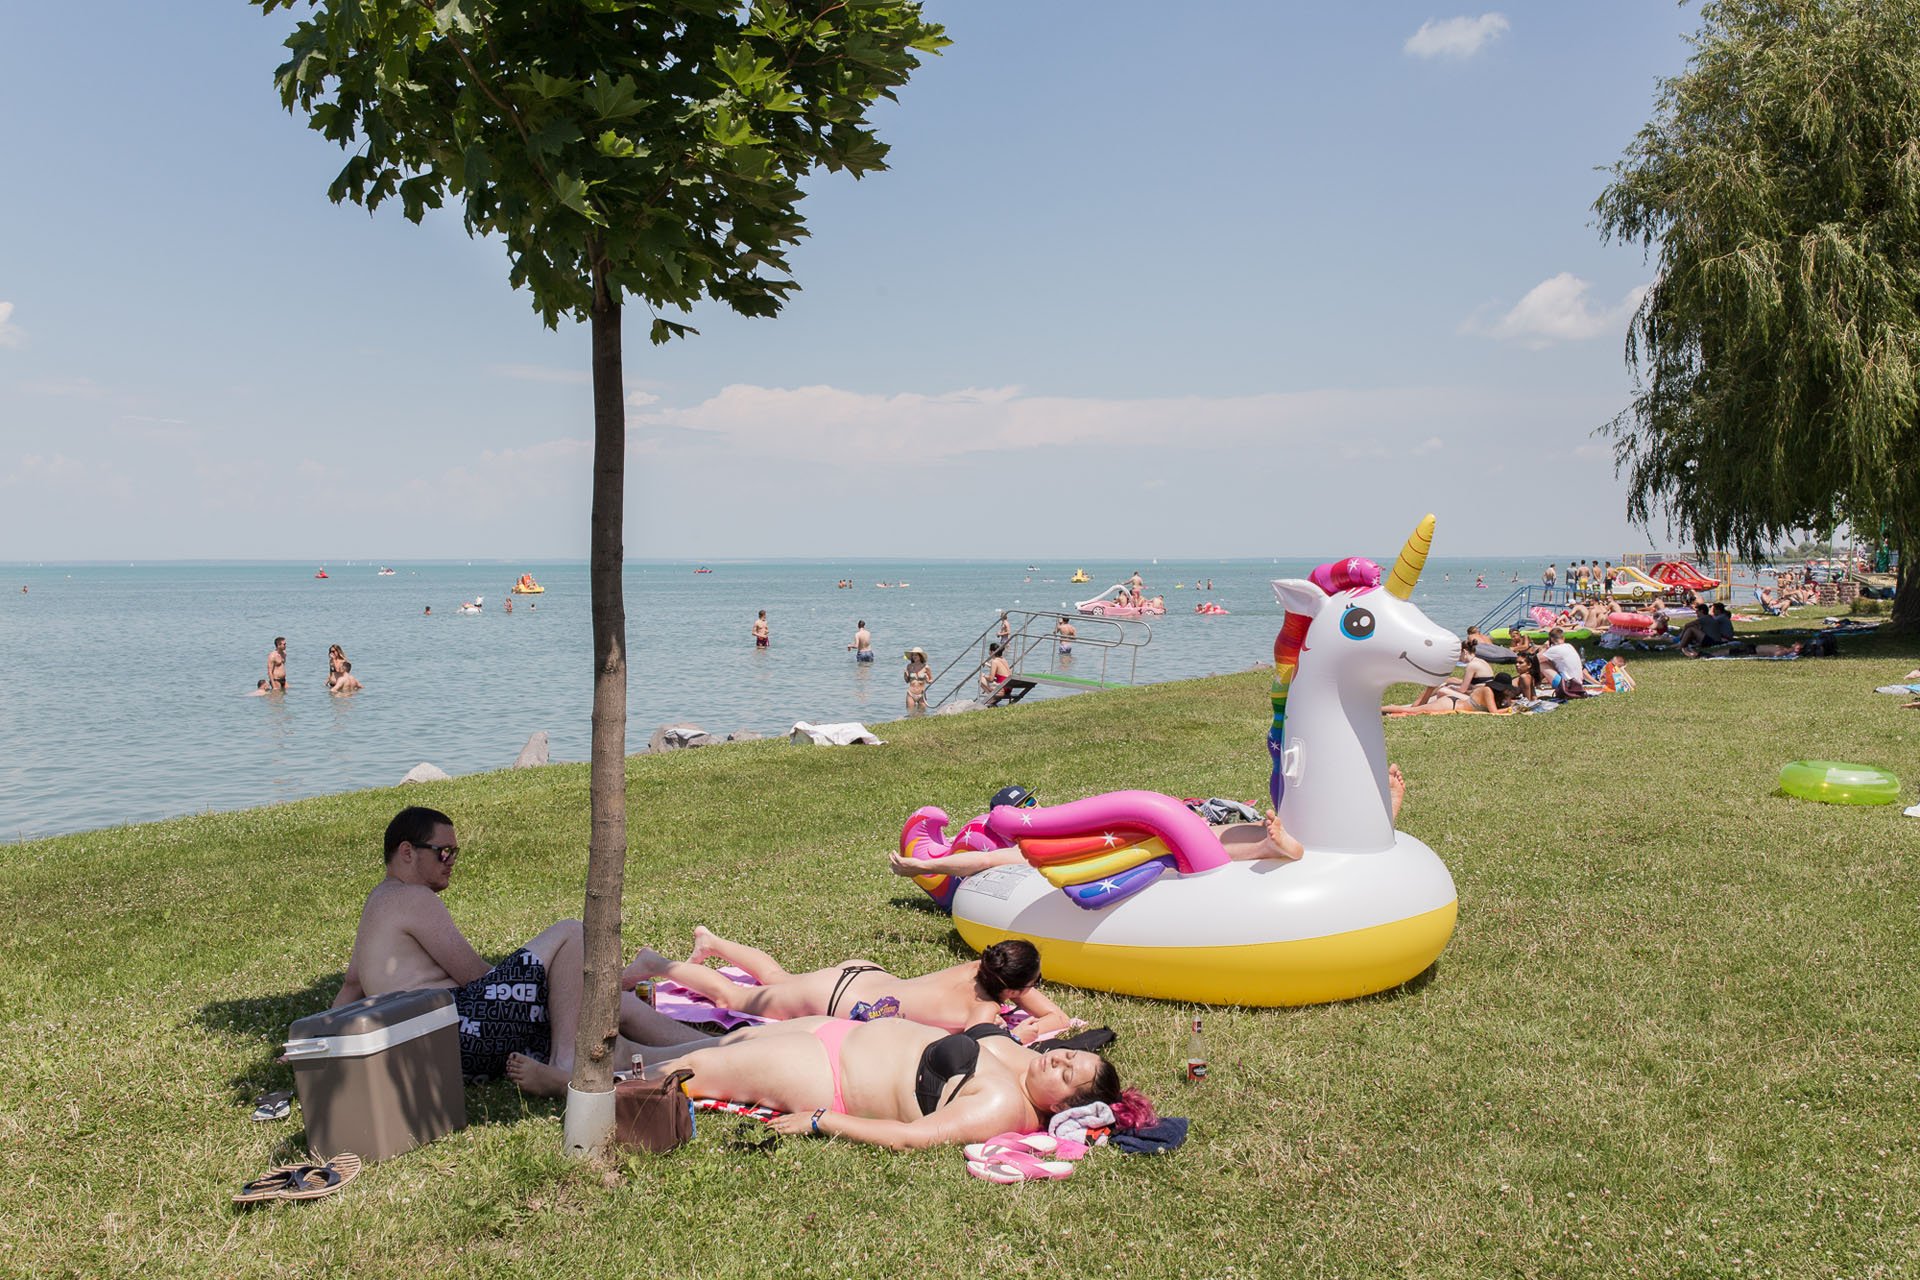 Discover the wild side of Lake Balaton, Hungary’s hedonistic summer escape